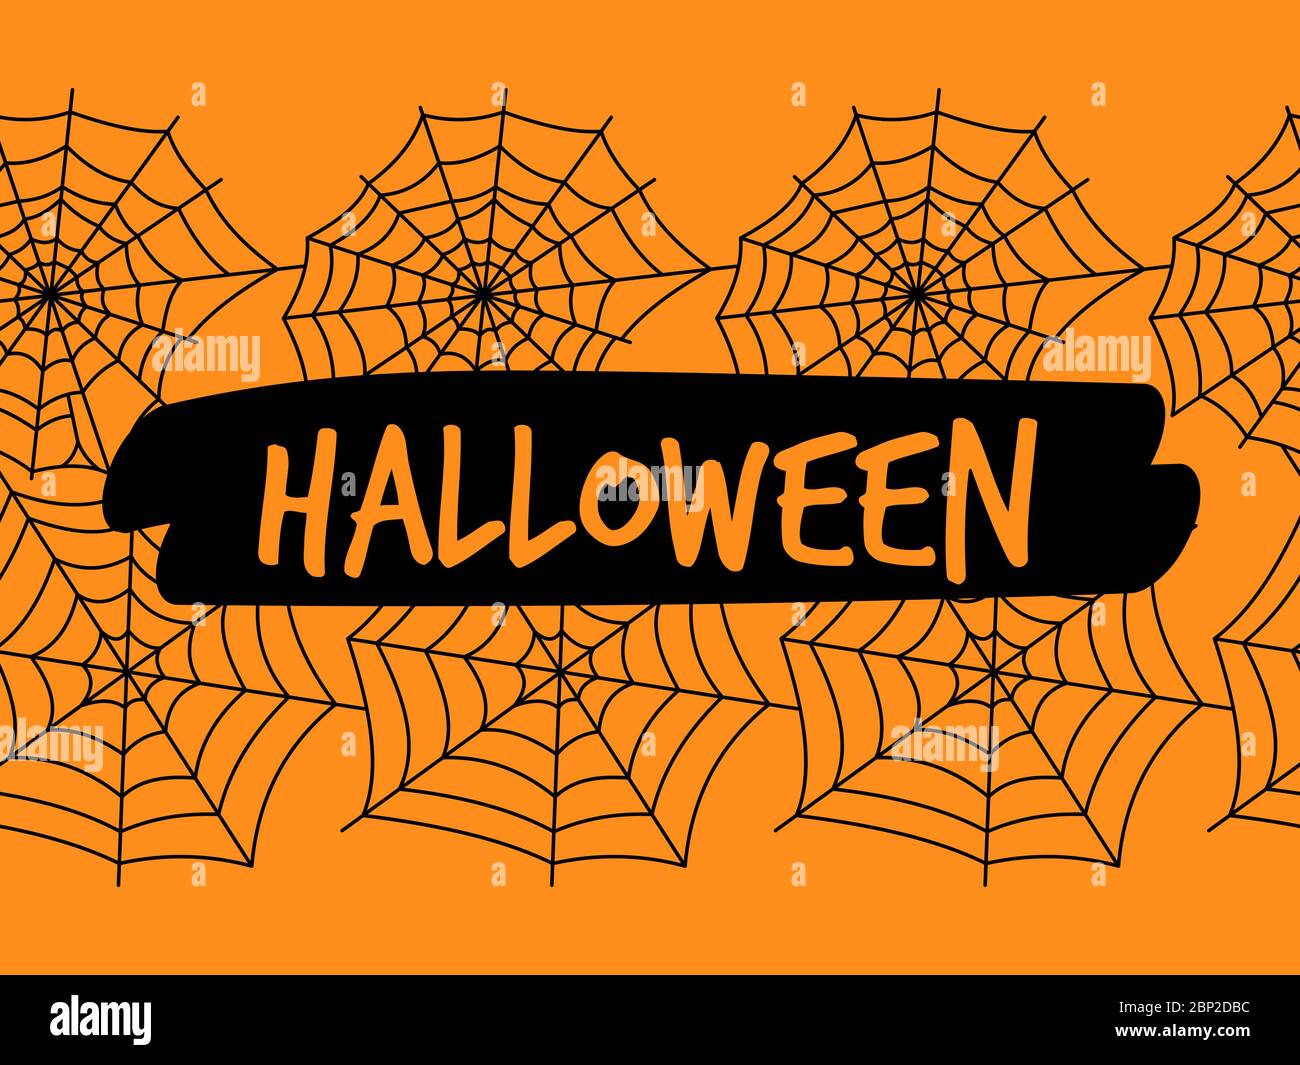 Halloween spiderweb seamless pattern and text banner, vector illustration Stock Vector